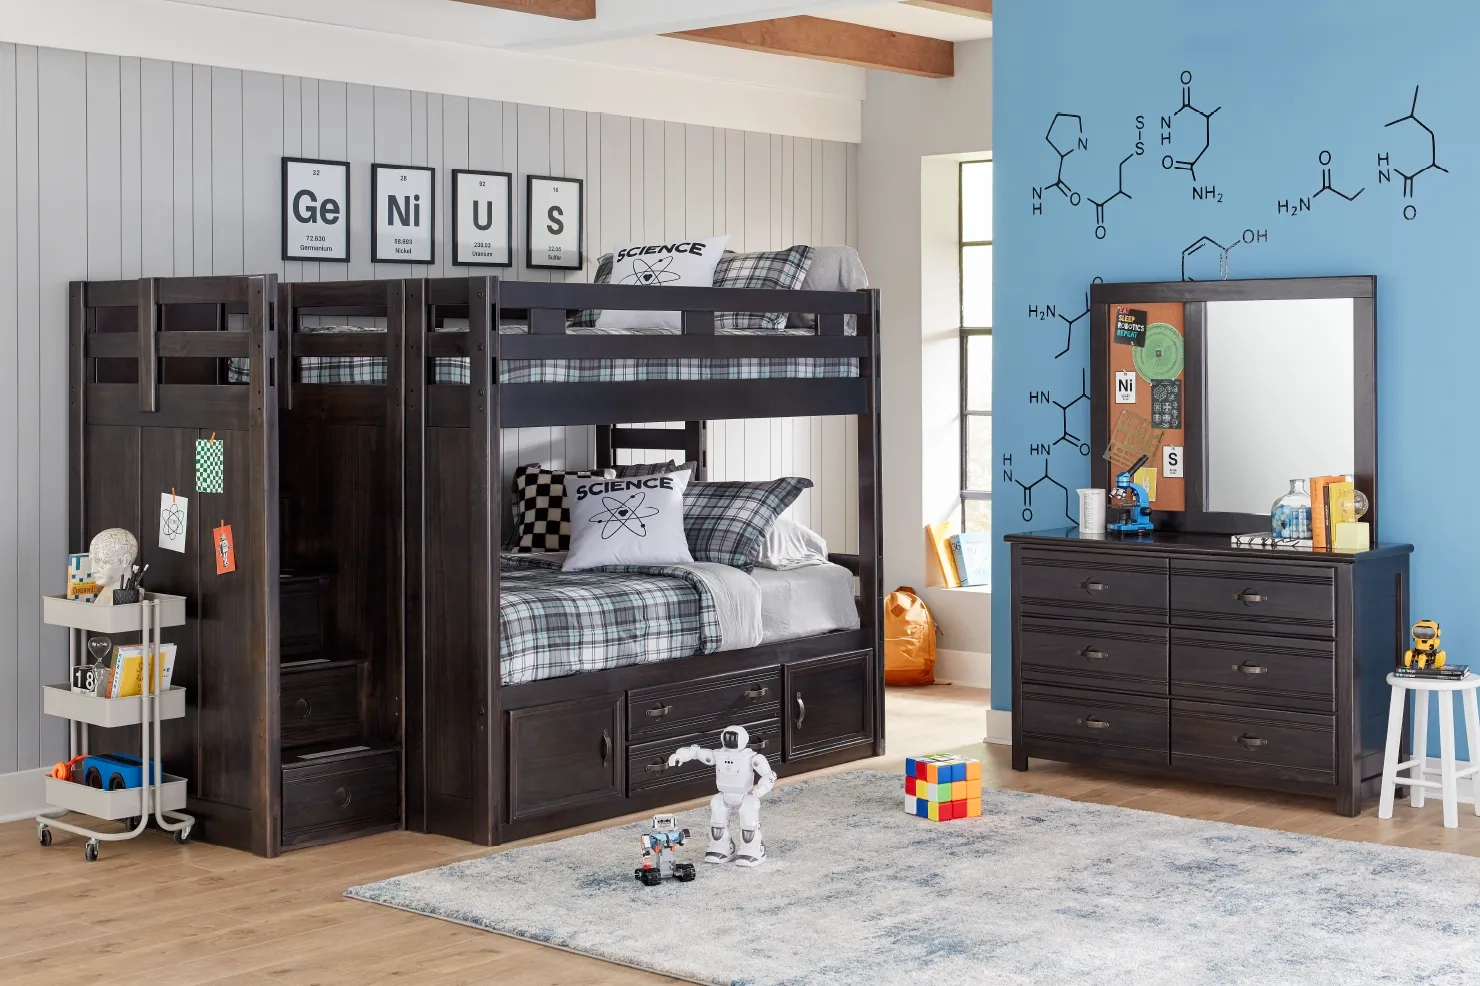 Affordable Furniture Store: Home Furniture for Less Online